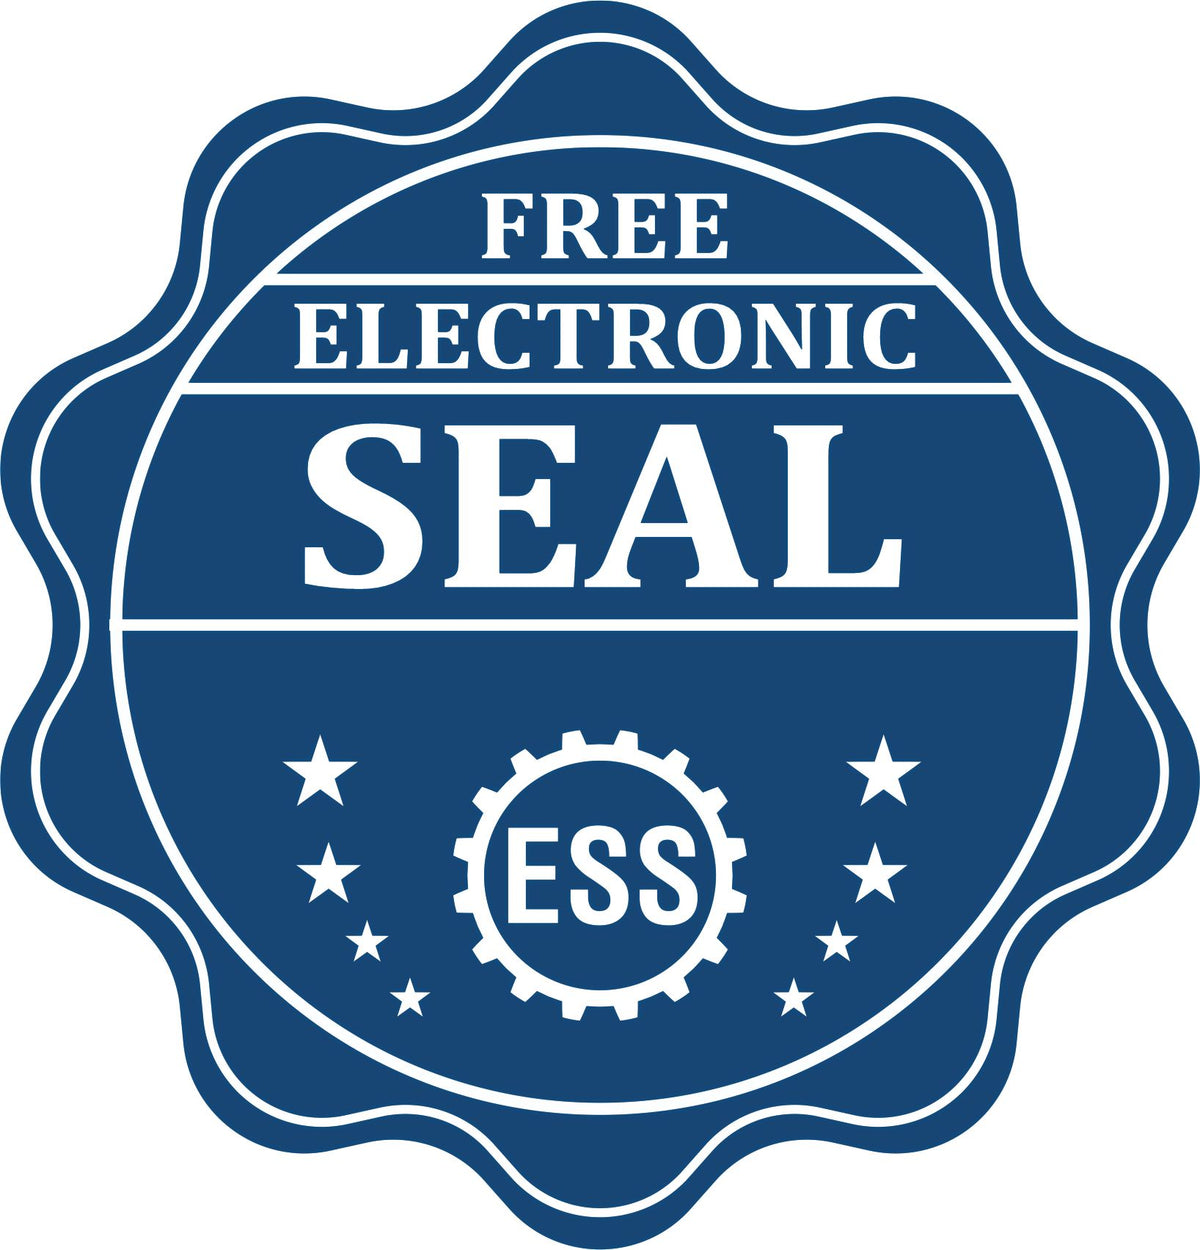 A badge showing a free electronic seal for the Long Reach Michigan PE Seal with stars and the ESS gear on the emblem.